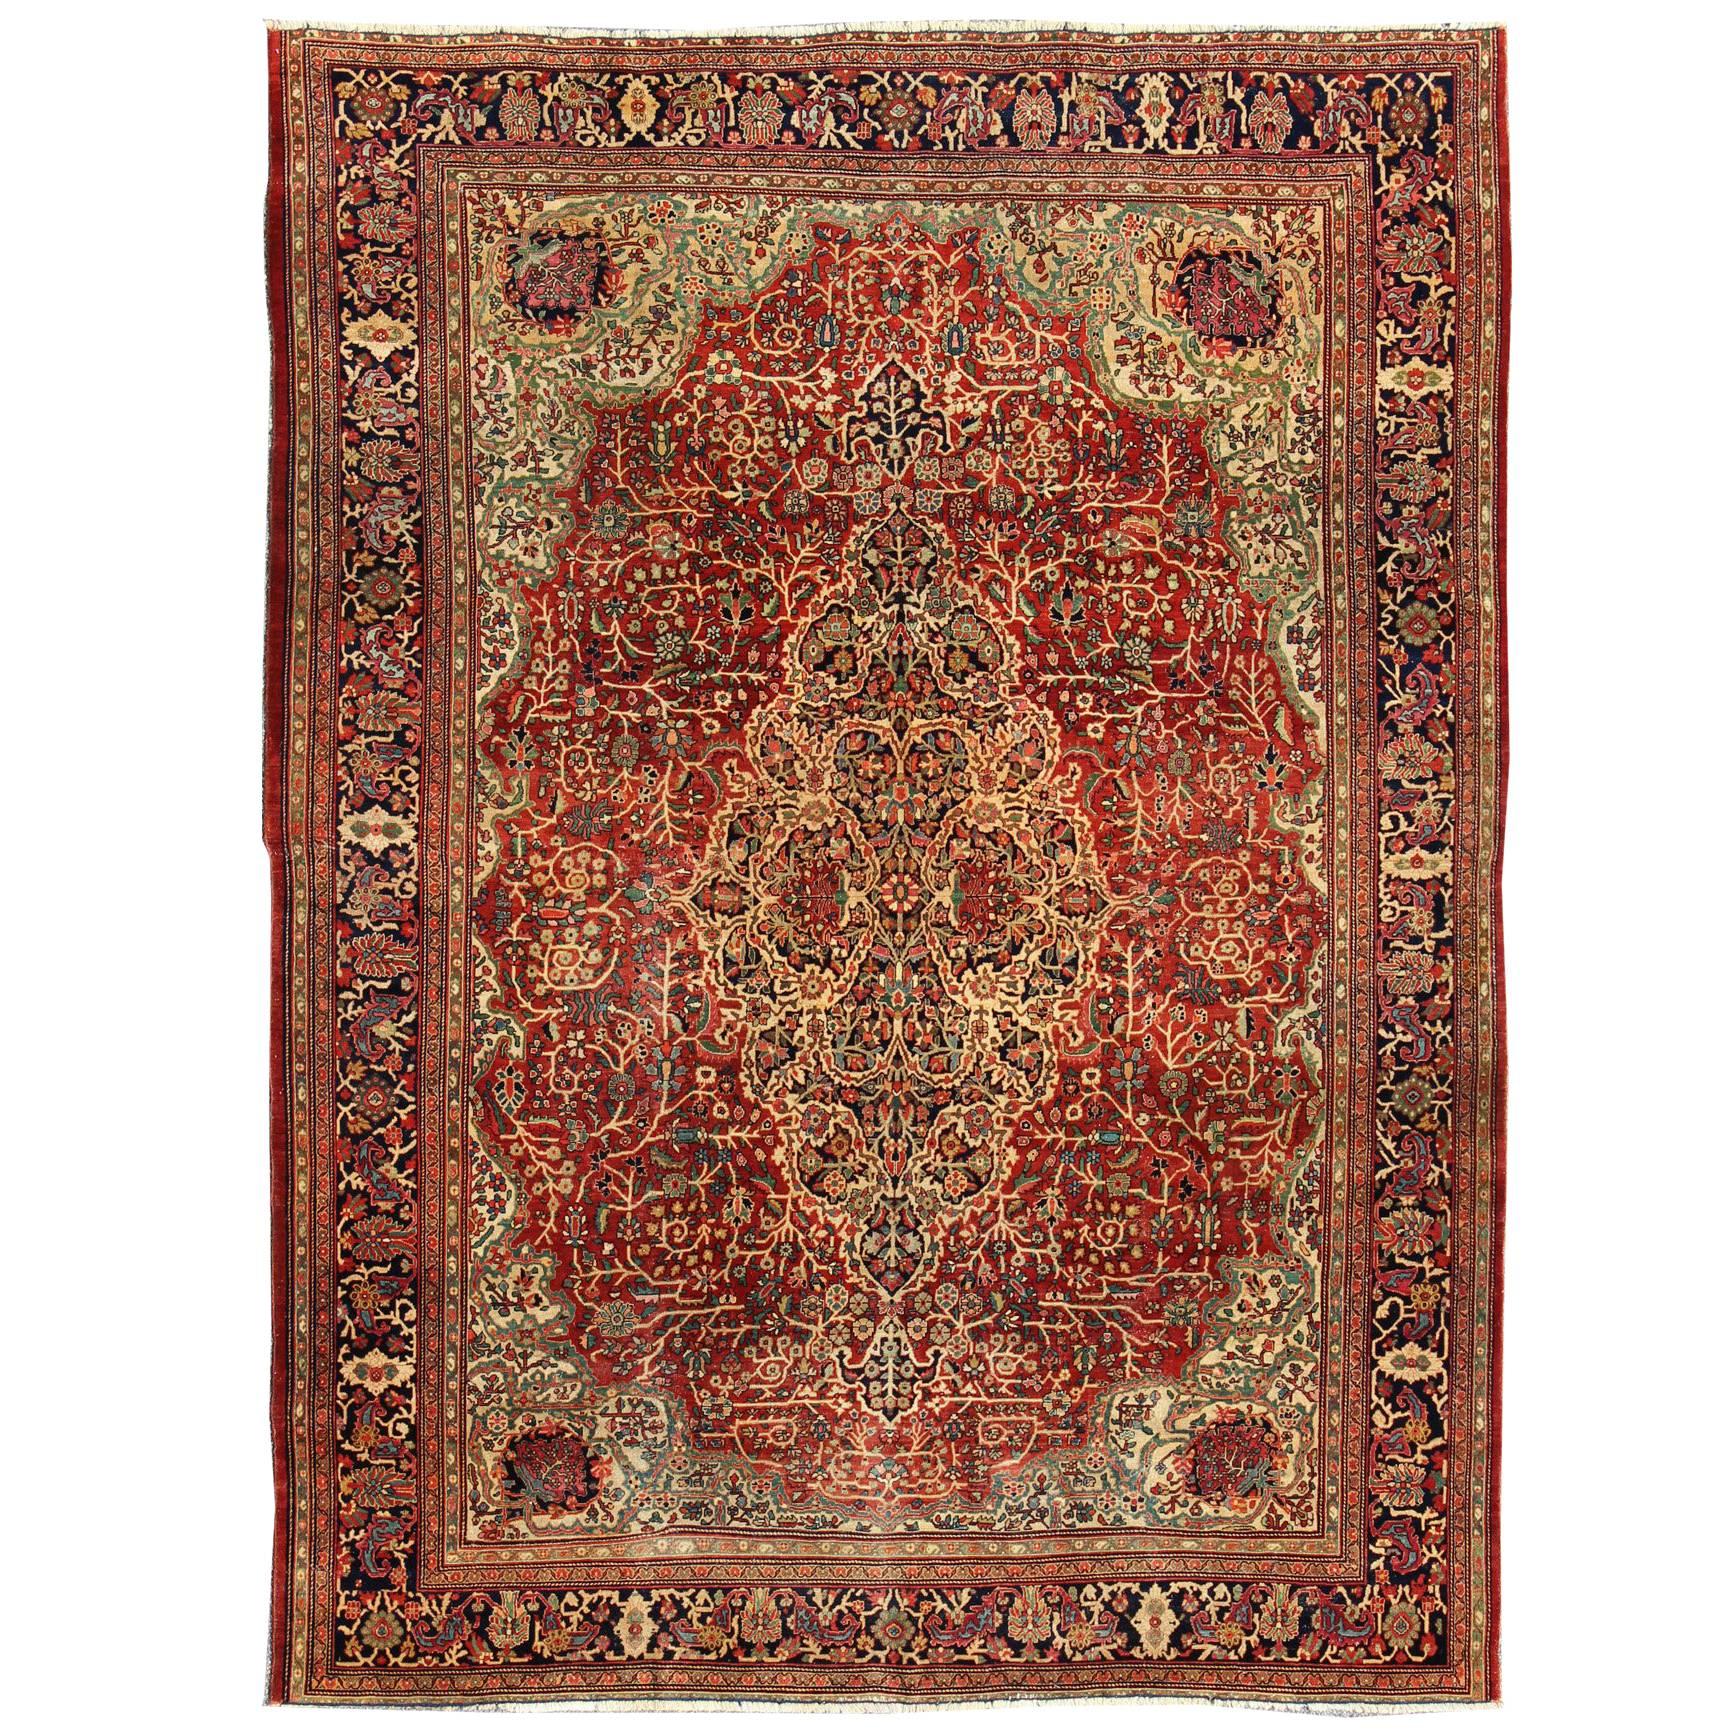  19th Century Antique Persian Sarouk Feraghan Rug with intricate Classic Design